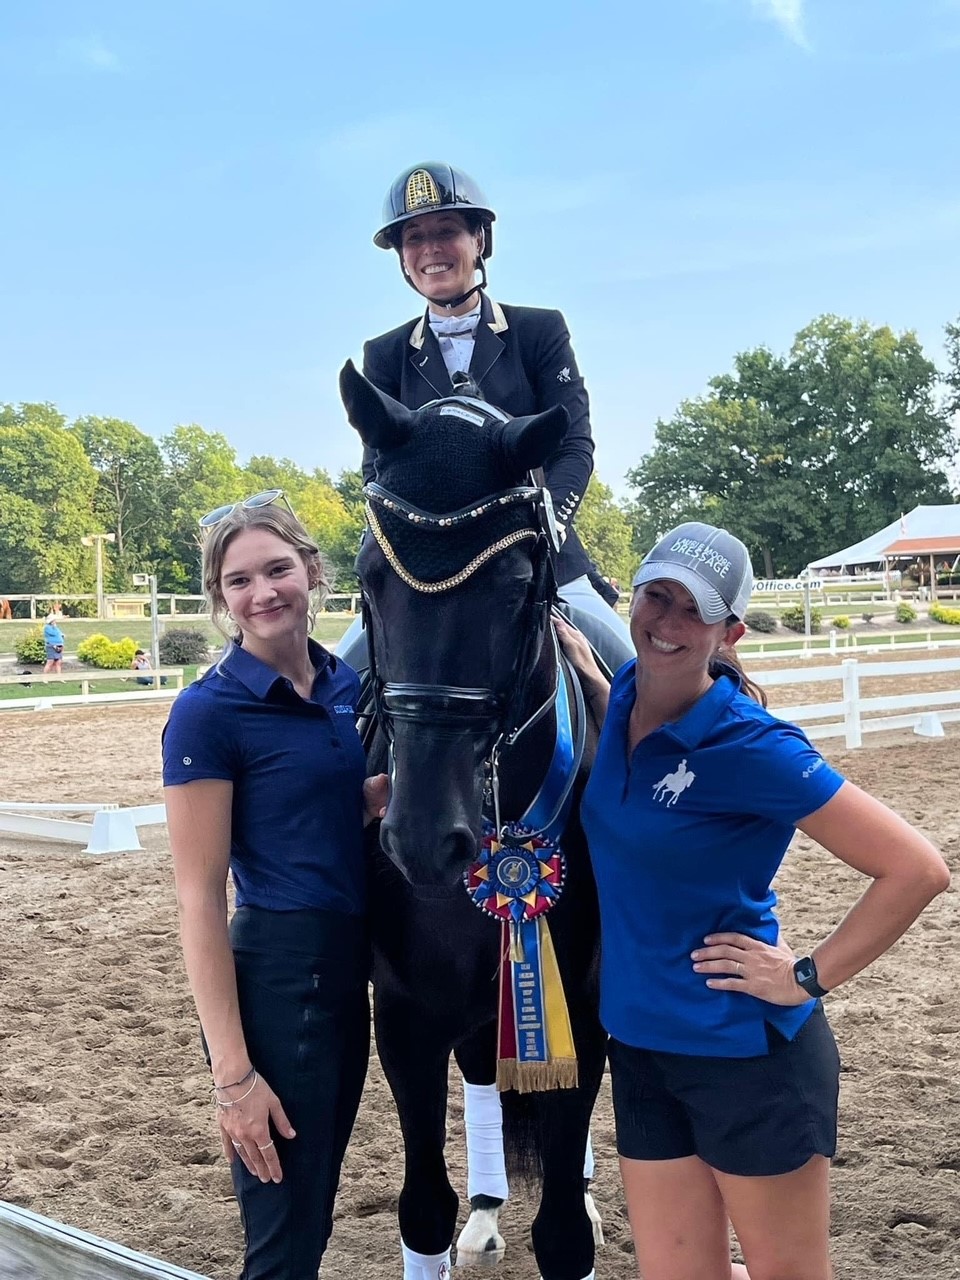 Groom Kelly Steele with Pam Heglund on Hottie at the regional championships